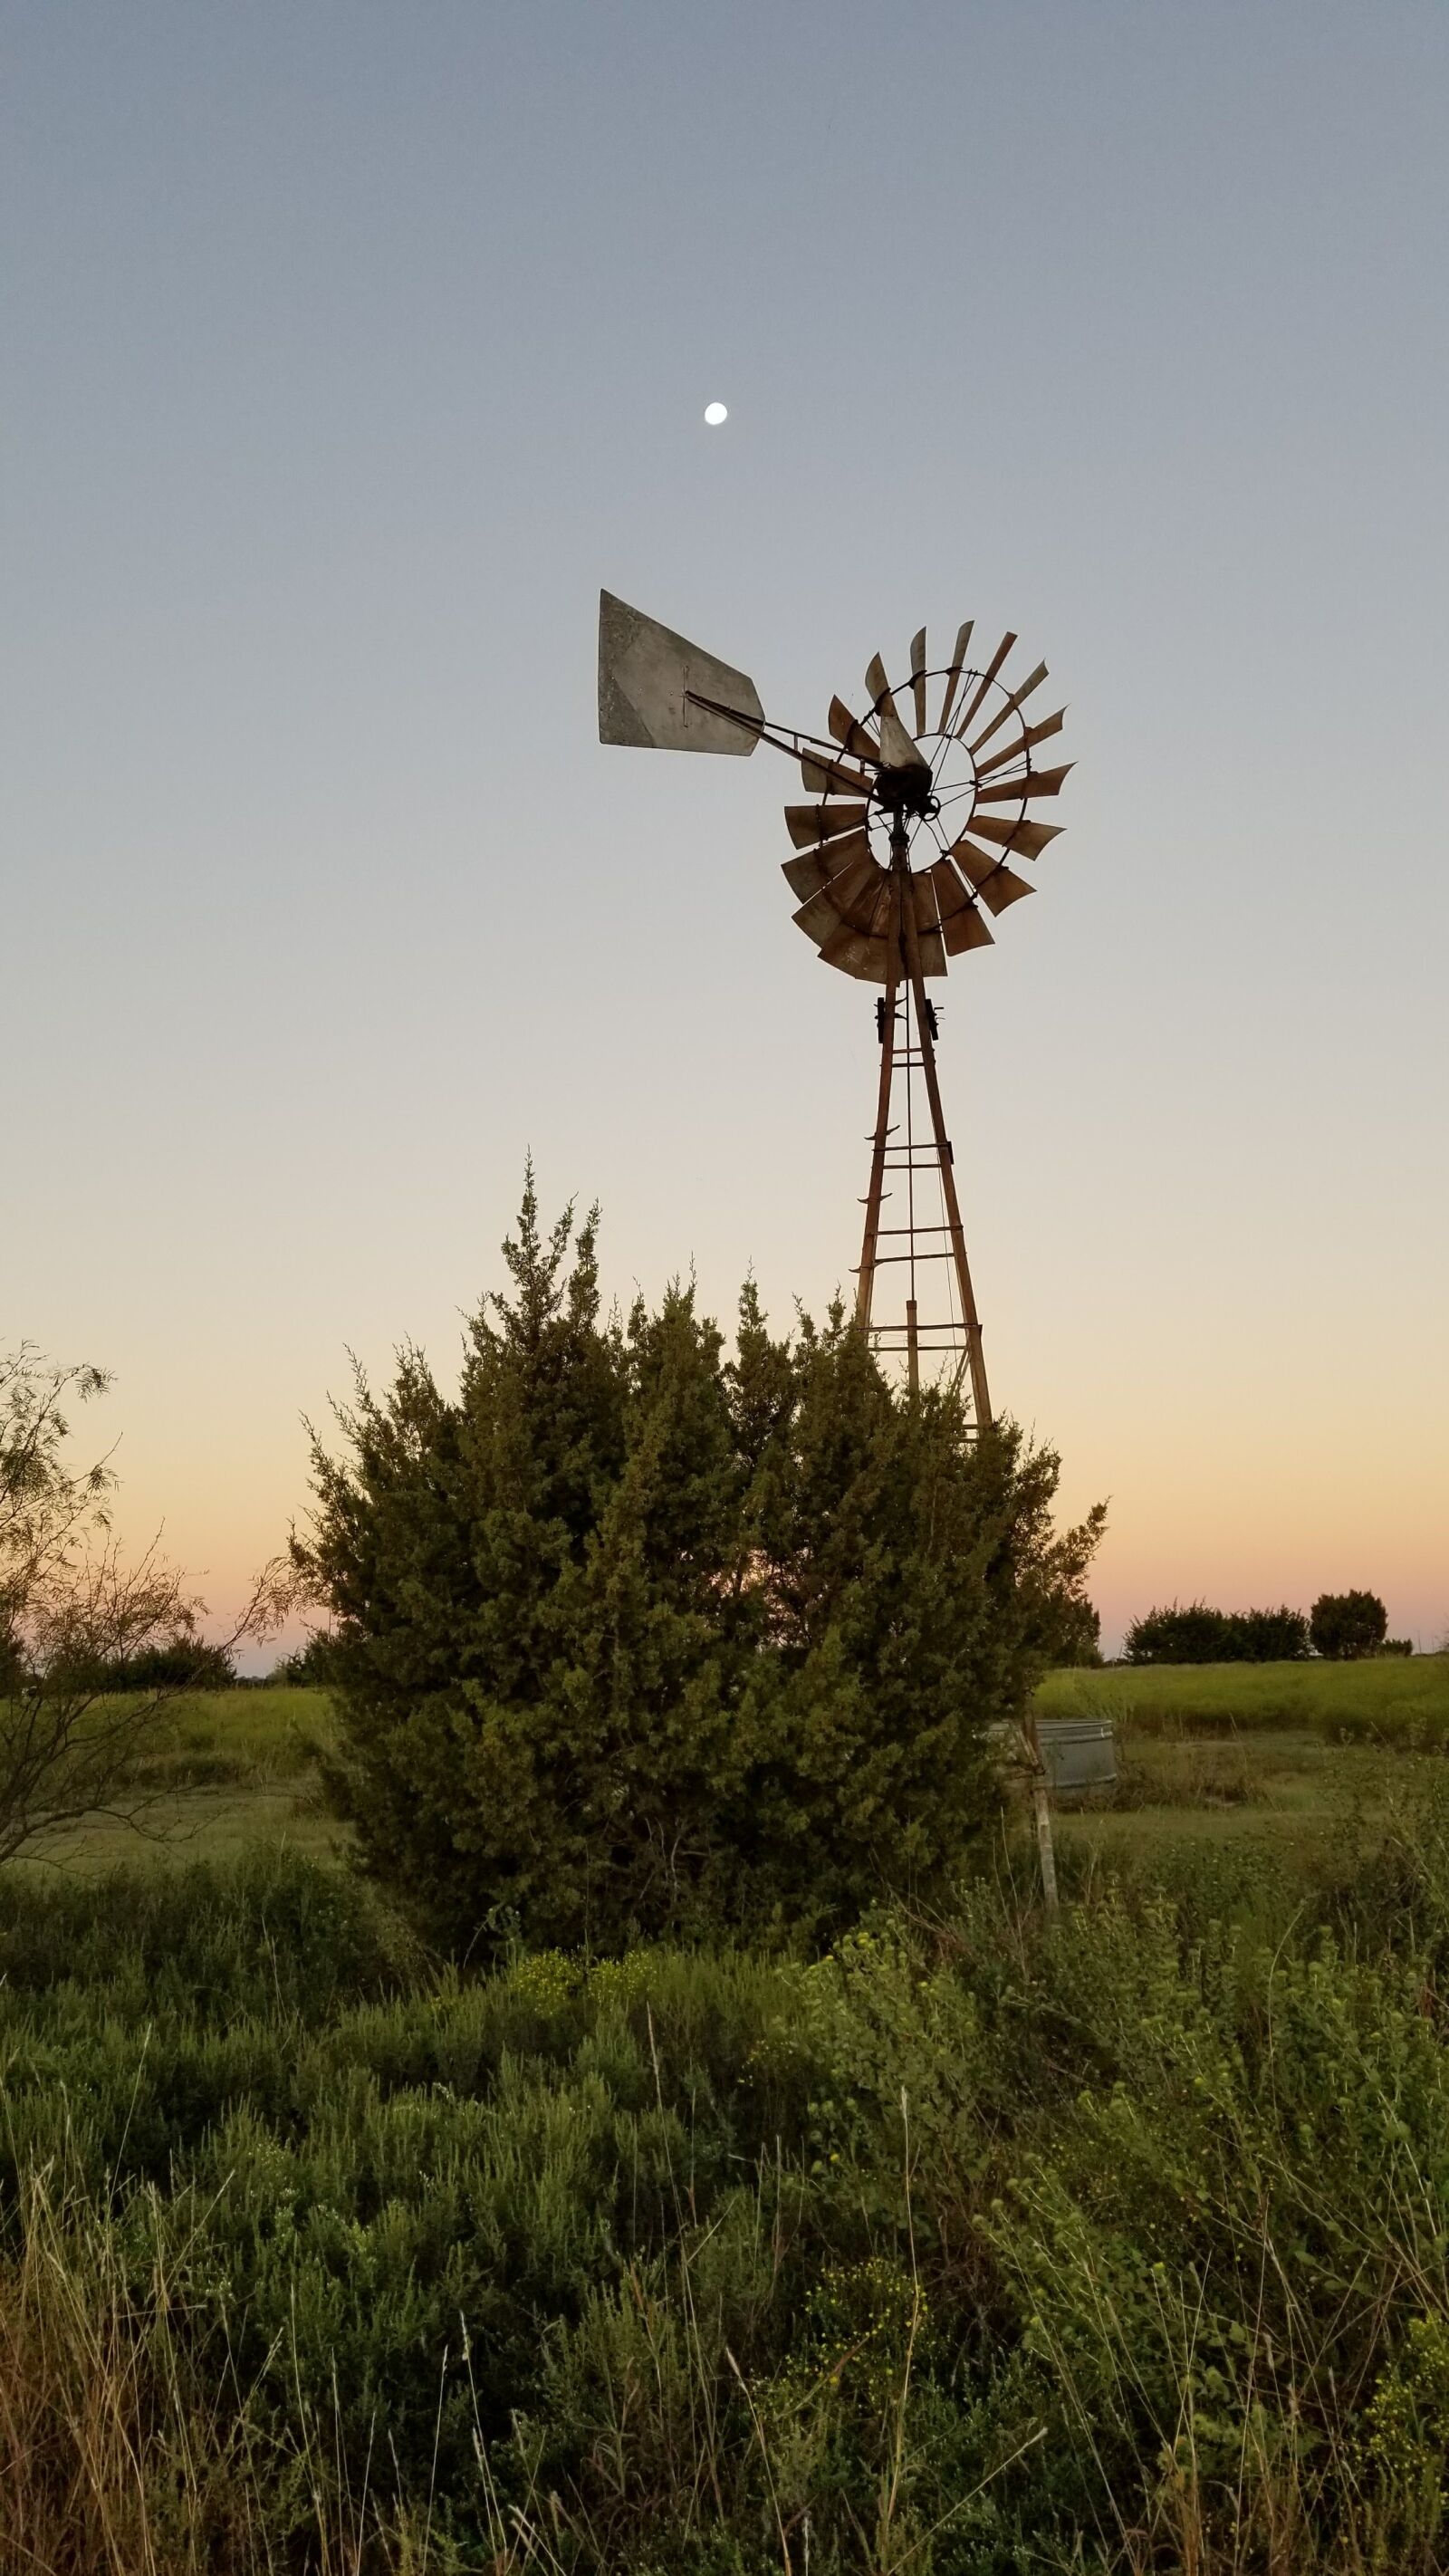 Samsung Galaxy S8+ sample photo. Country, well, windmill photography